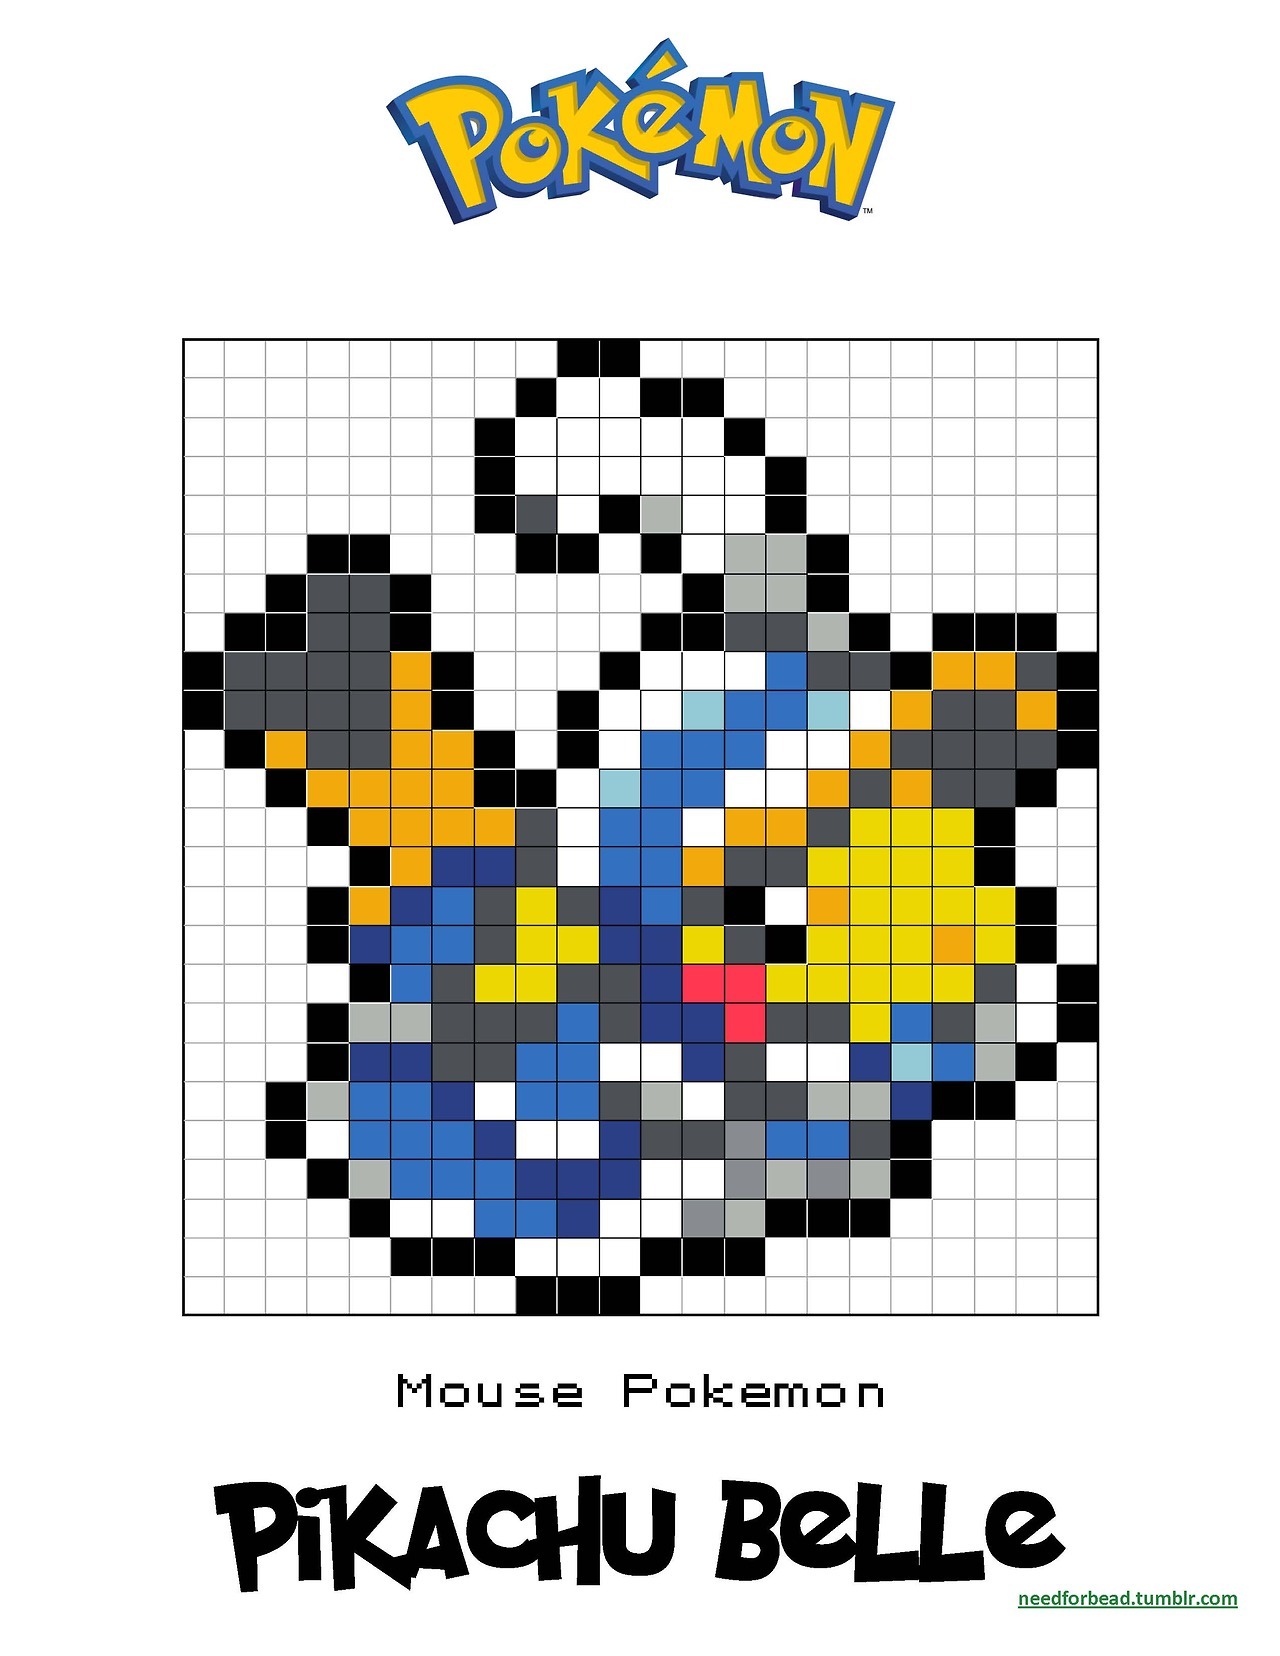 December Pokemon Challenge Day 6: ELECTRIC TYPE... - Need for Bead